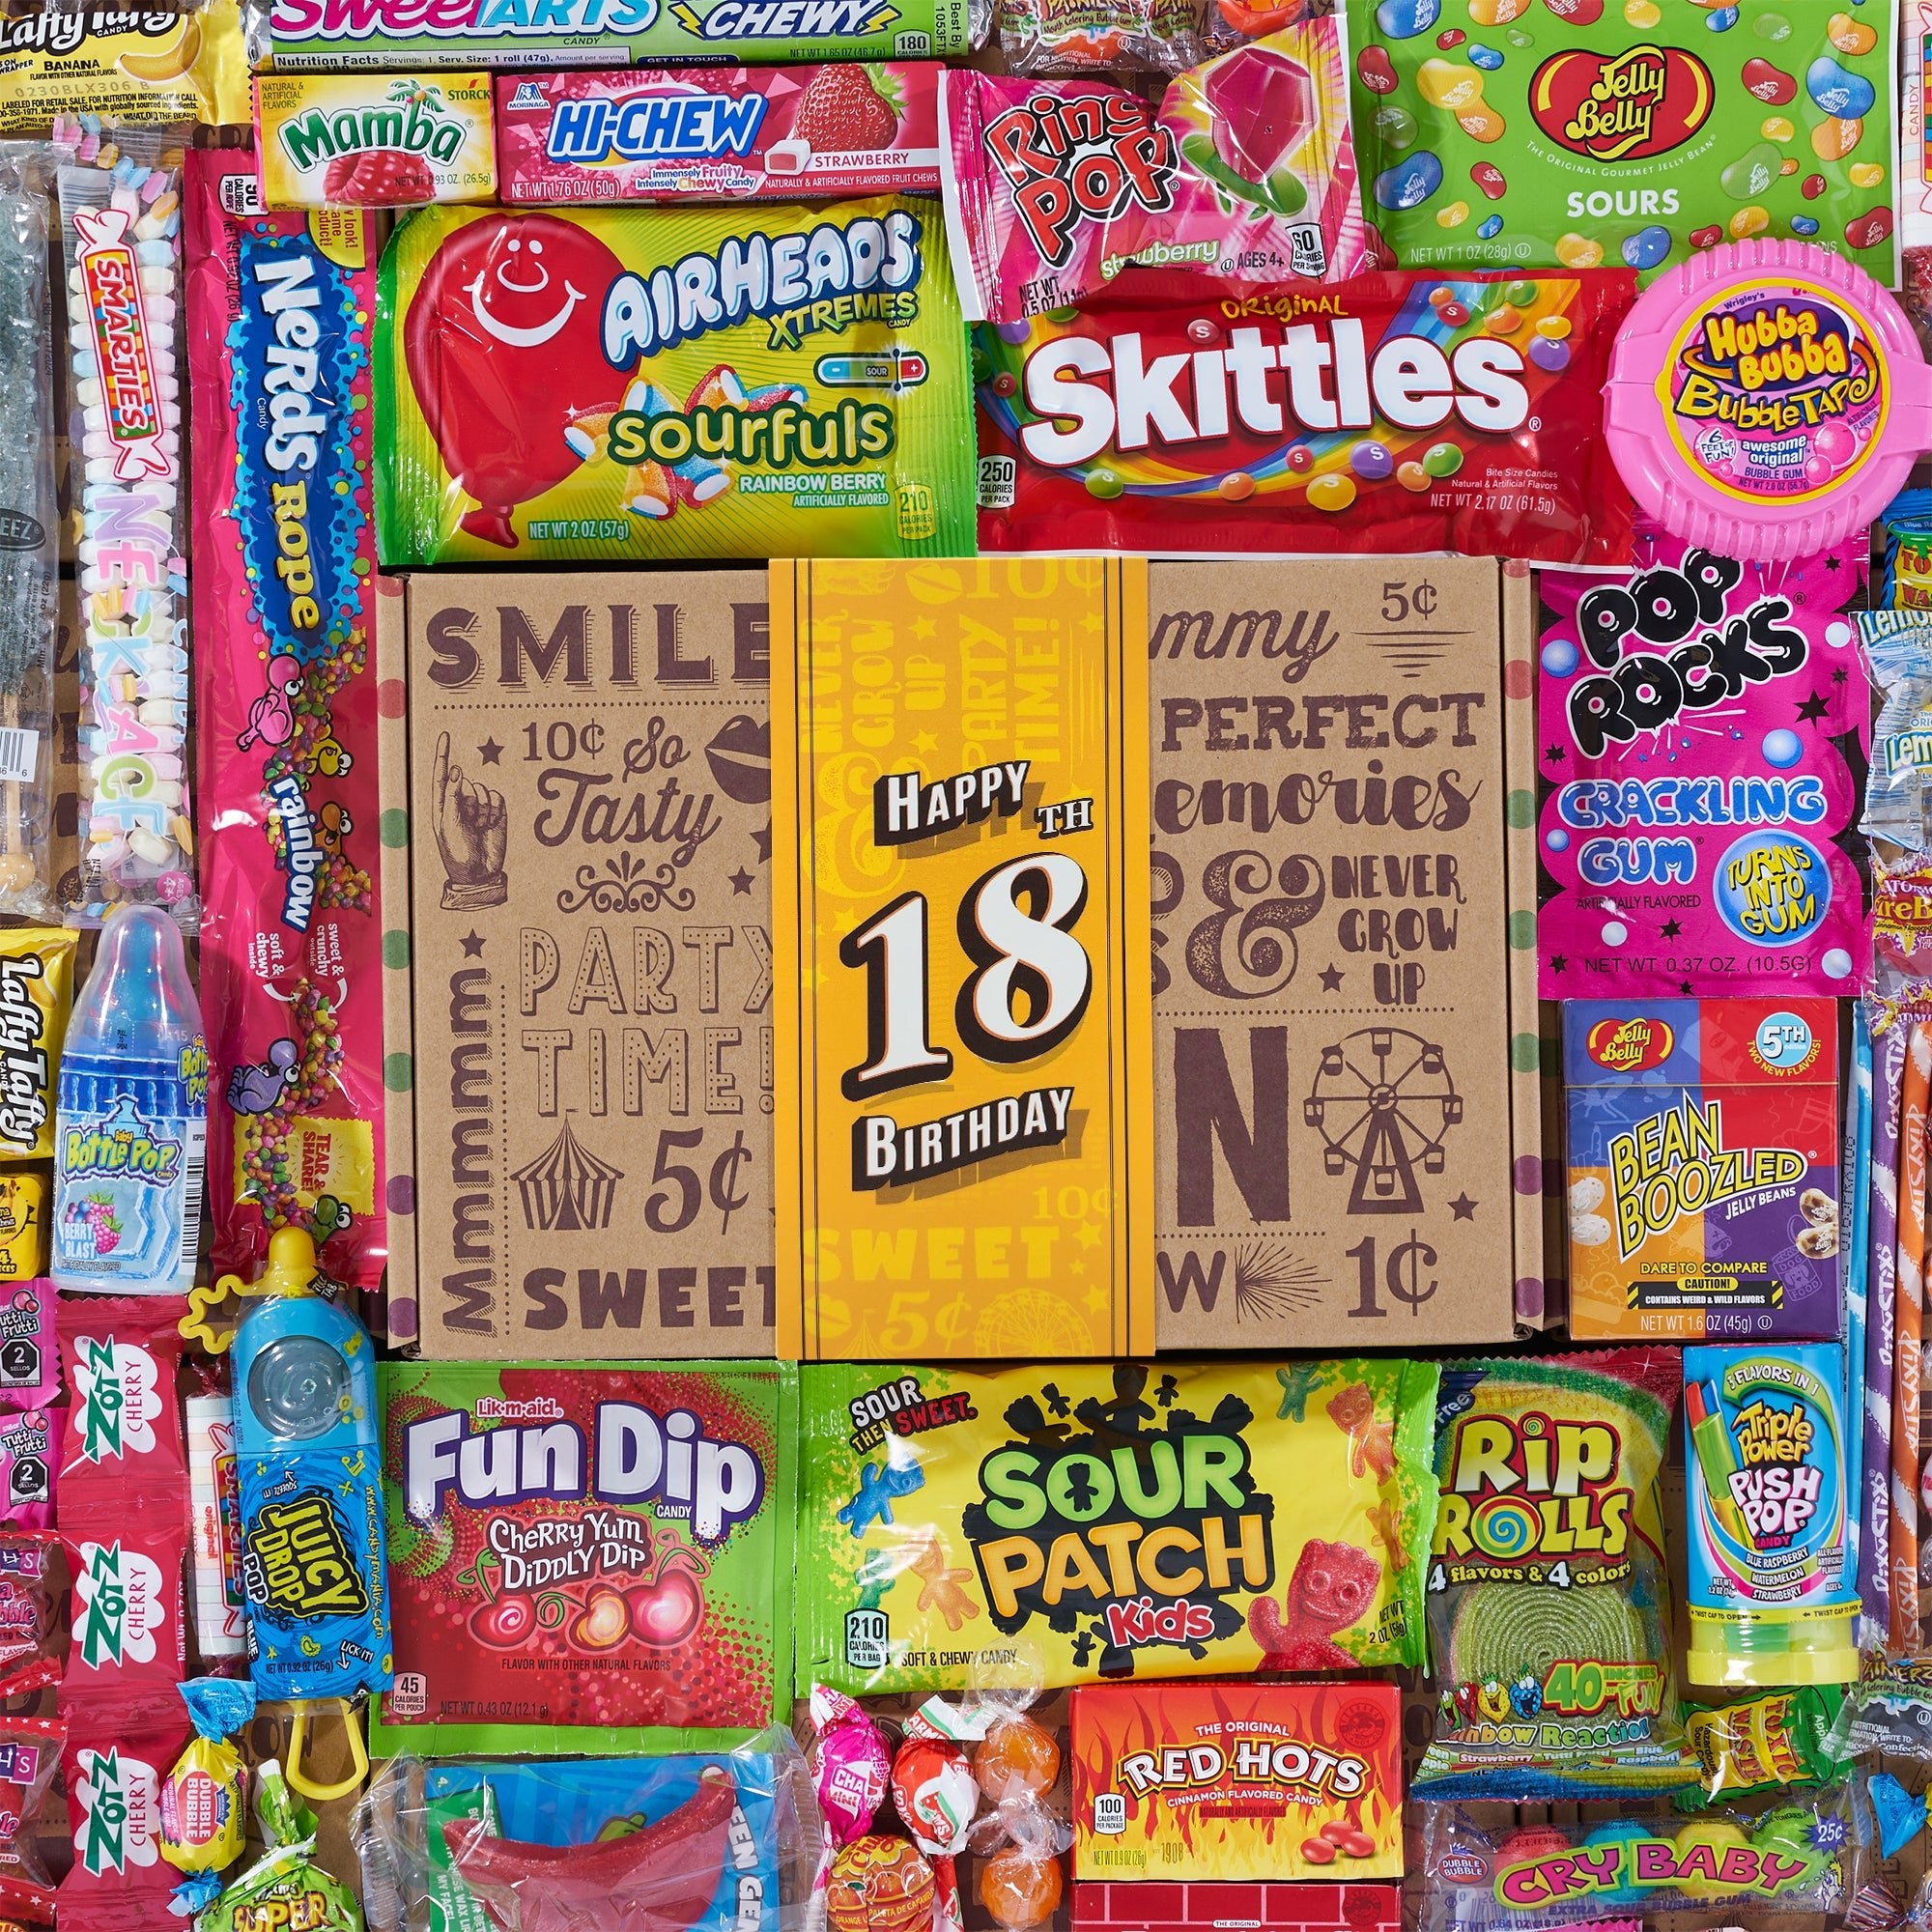 18th Birthday Retro Candy Gift - Vintage Candy Co.